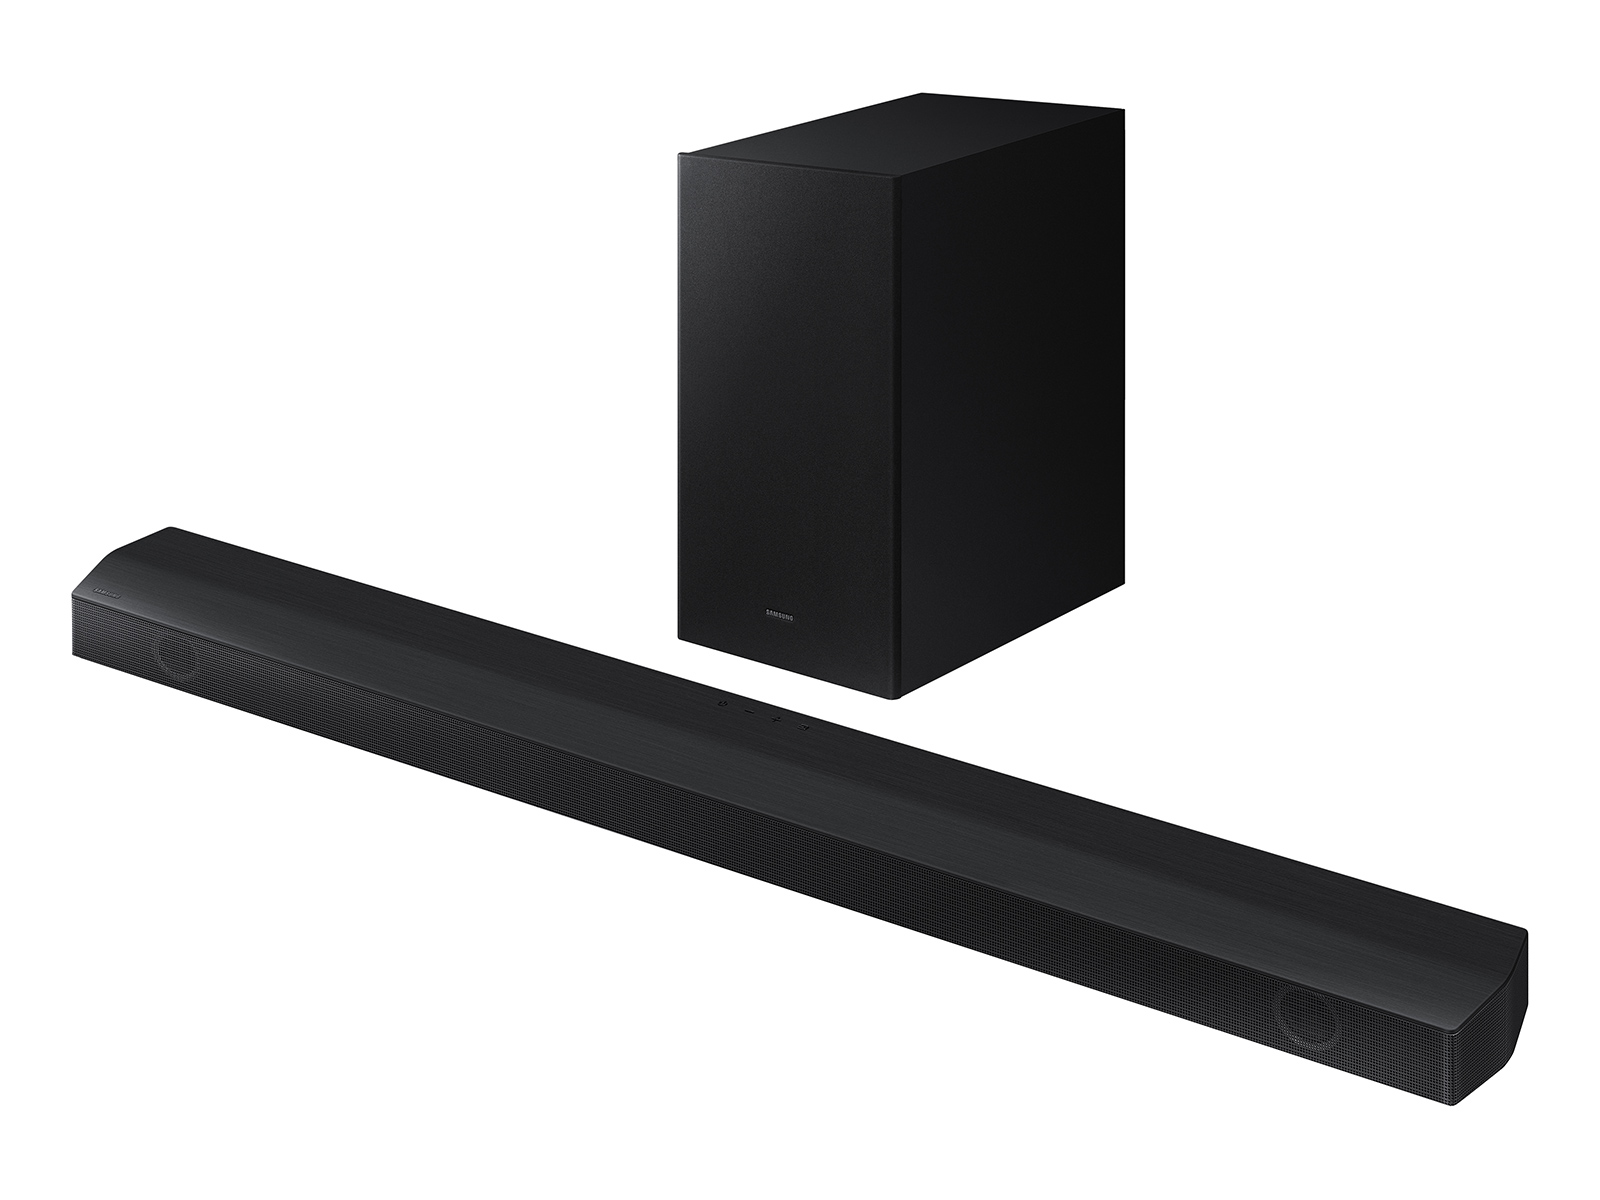 SamsungUS/home/television-home-theater/home-theater/sound-bars/9192022/HW-B650_002_Set-R-Perspective_Black-Gallery-1600x1200.jpg